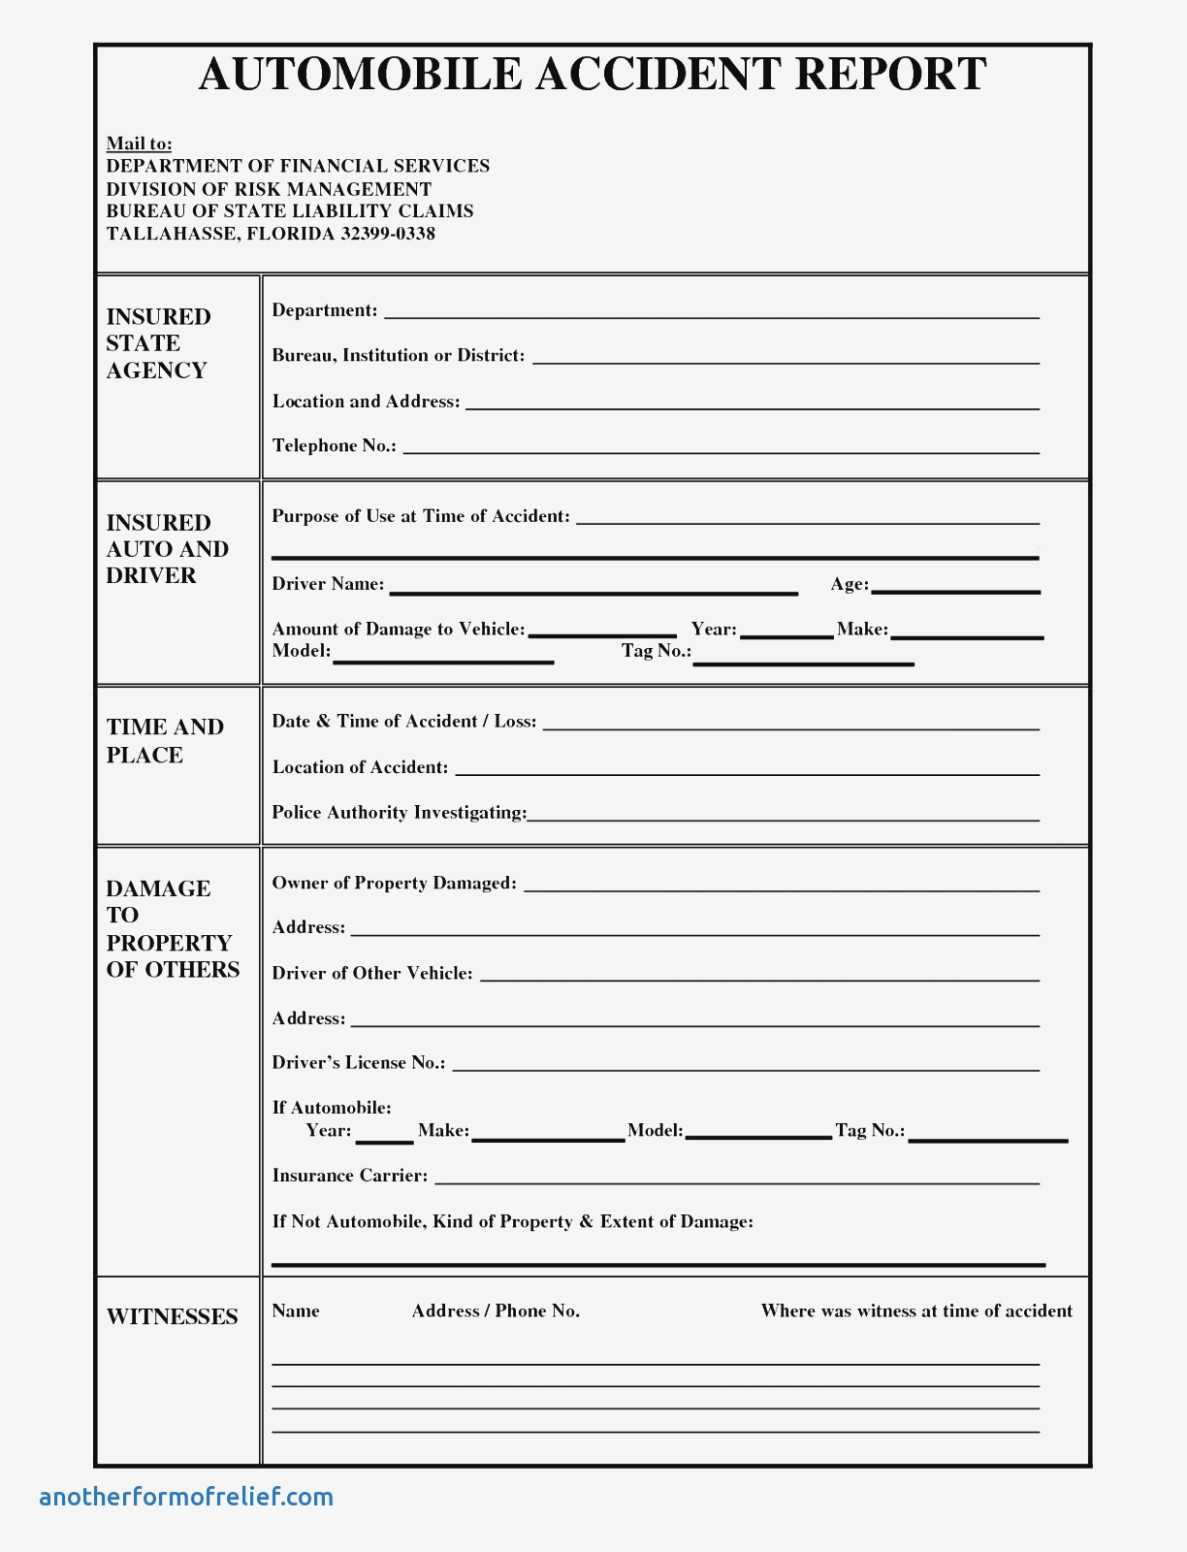 Auto Accident Report Form Income Tax Keep In Your Glove Box Regarding Motor Vehicle Accident Report Form Template